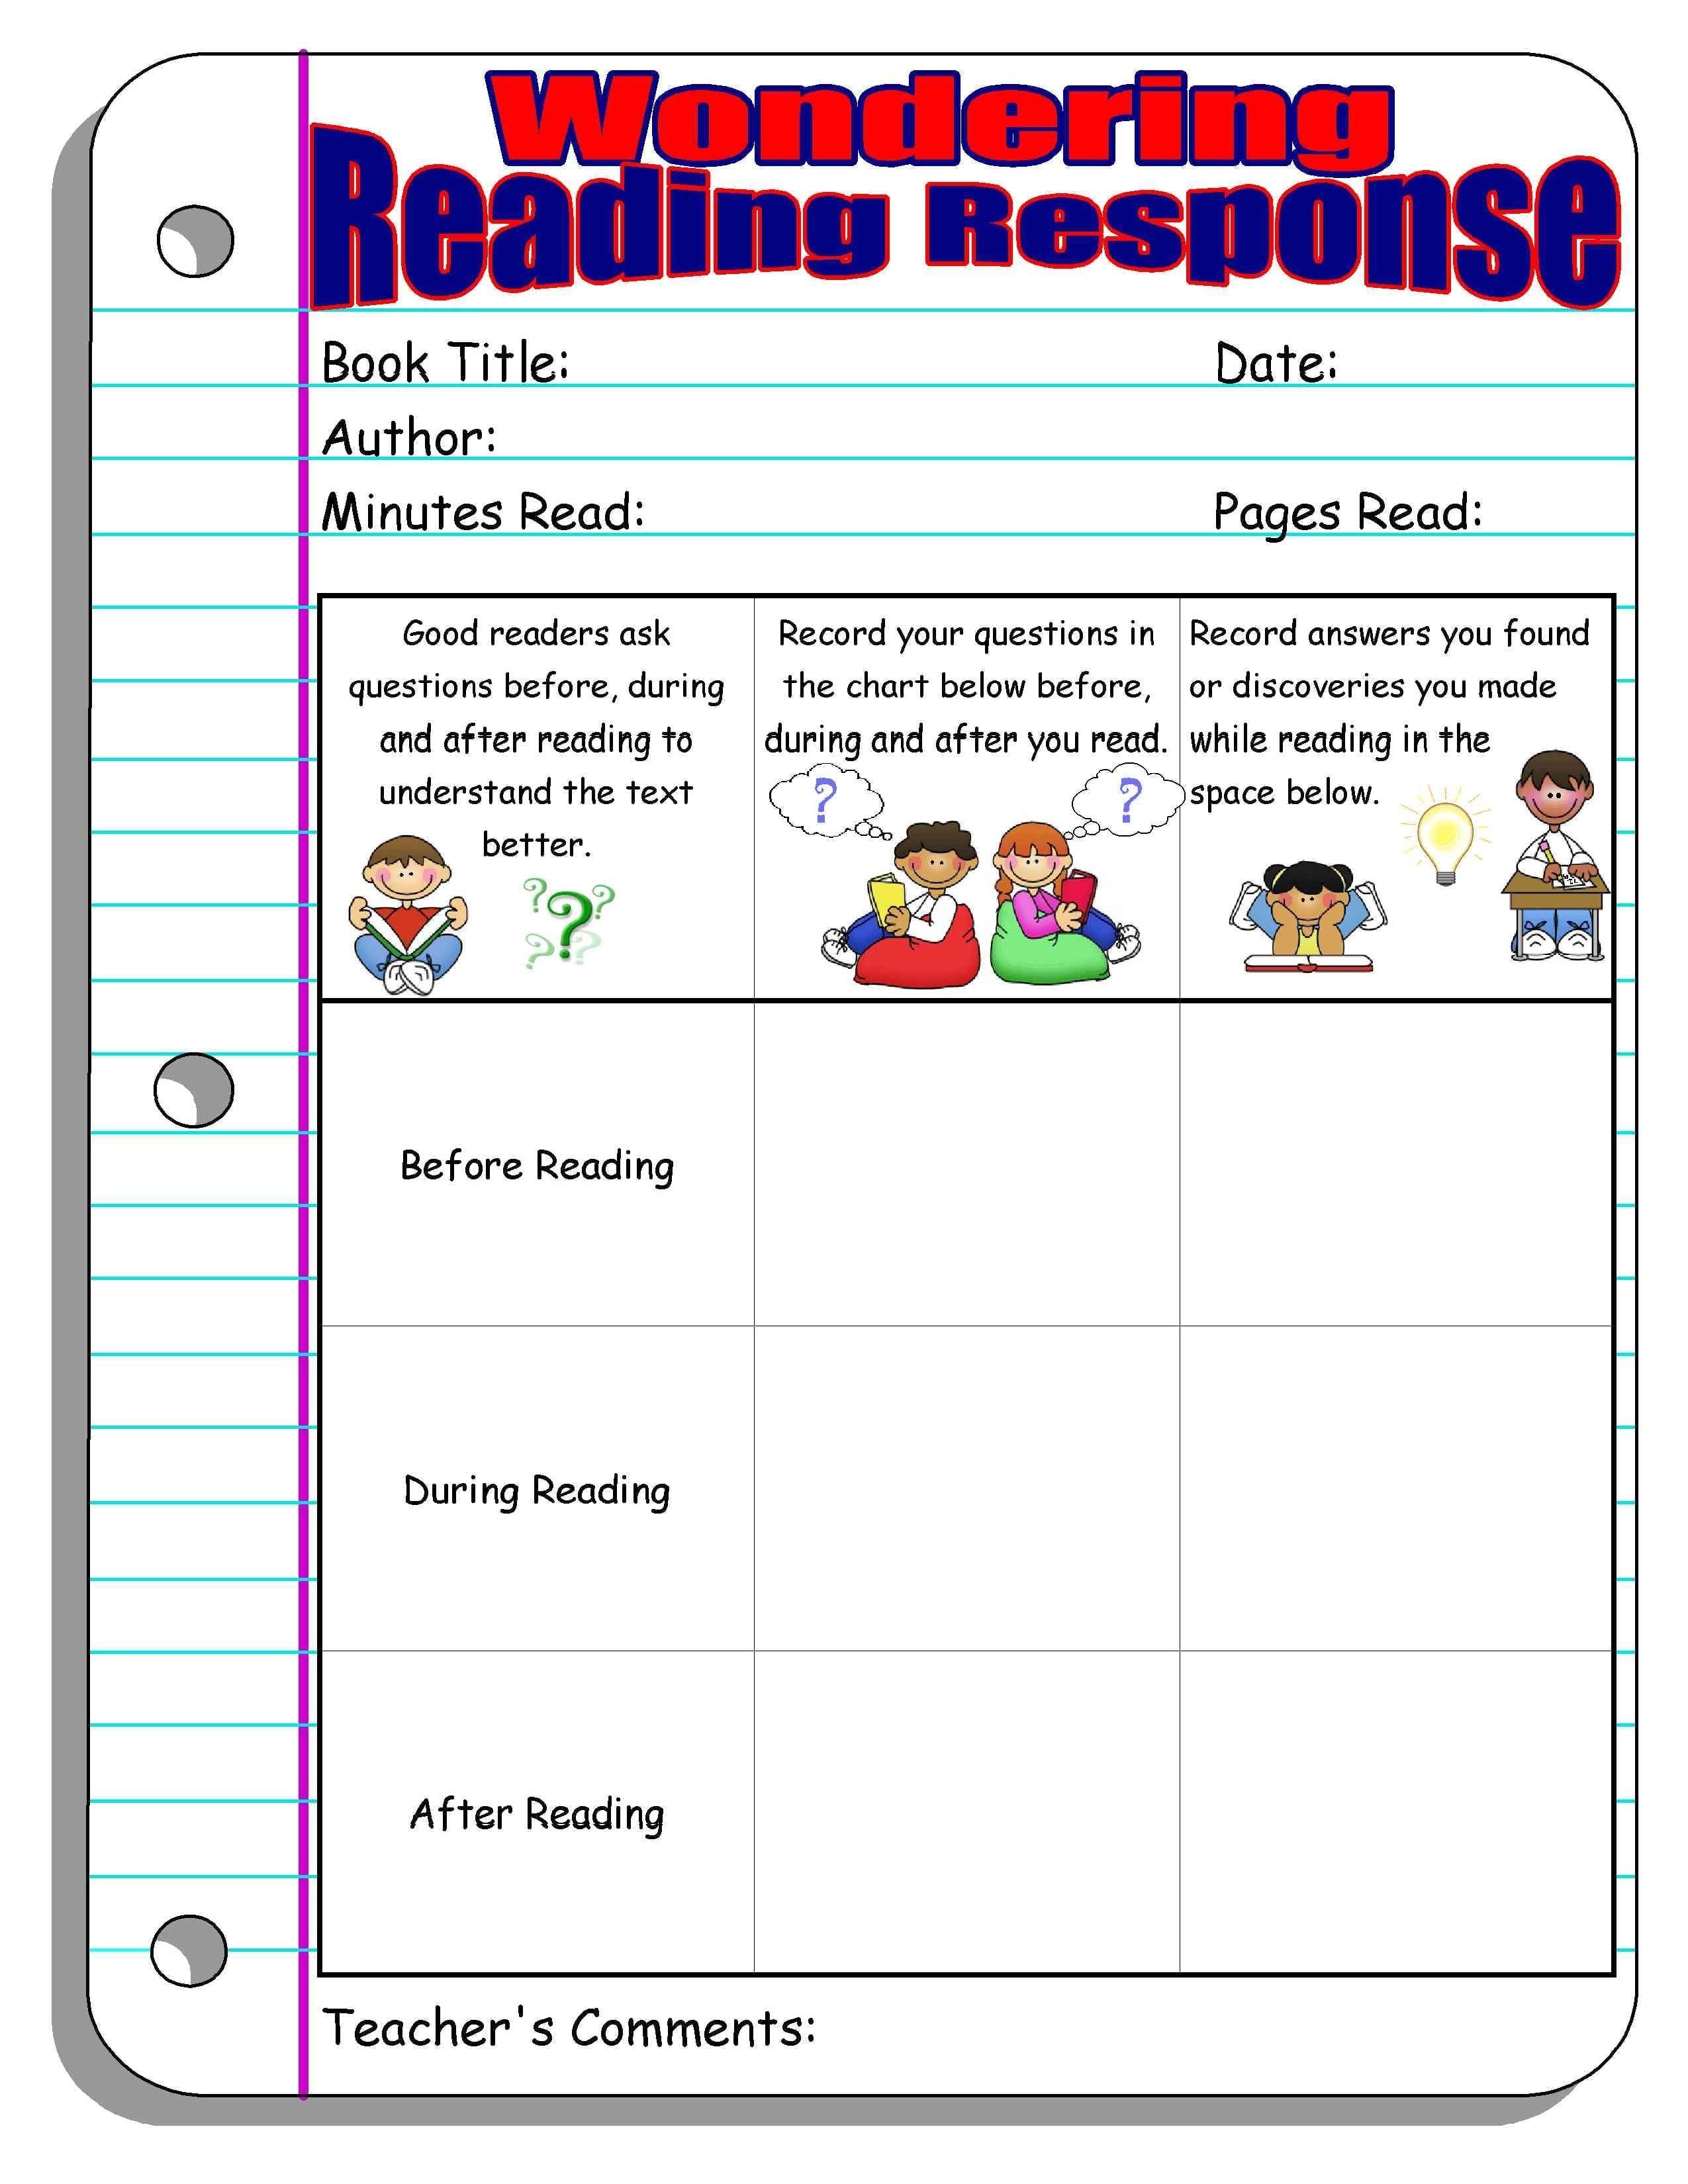 Reading Response Forms And Graphic Organizers  Scholastic Throughout Setting A Purpose For Reading Worksheet